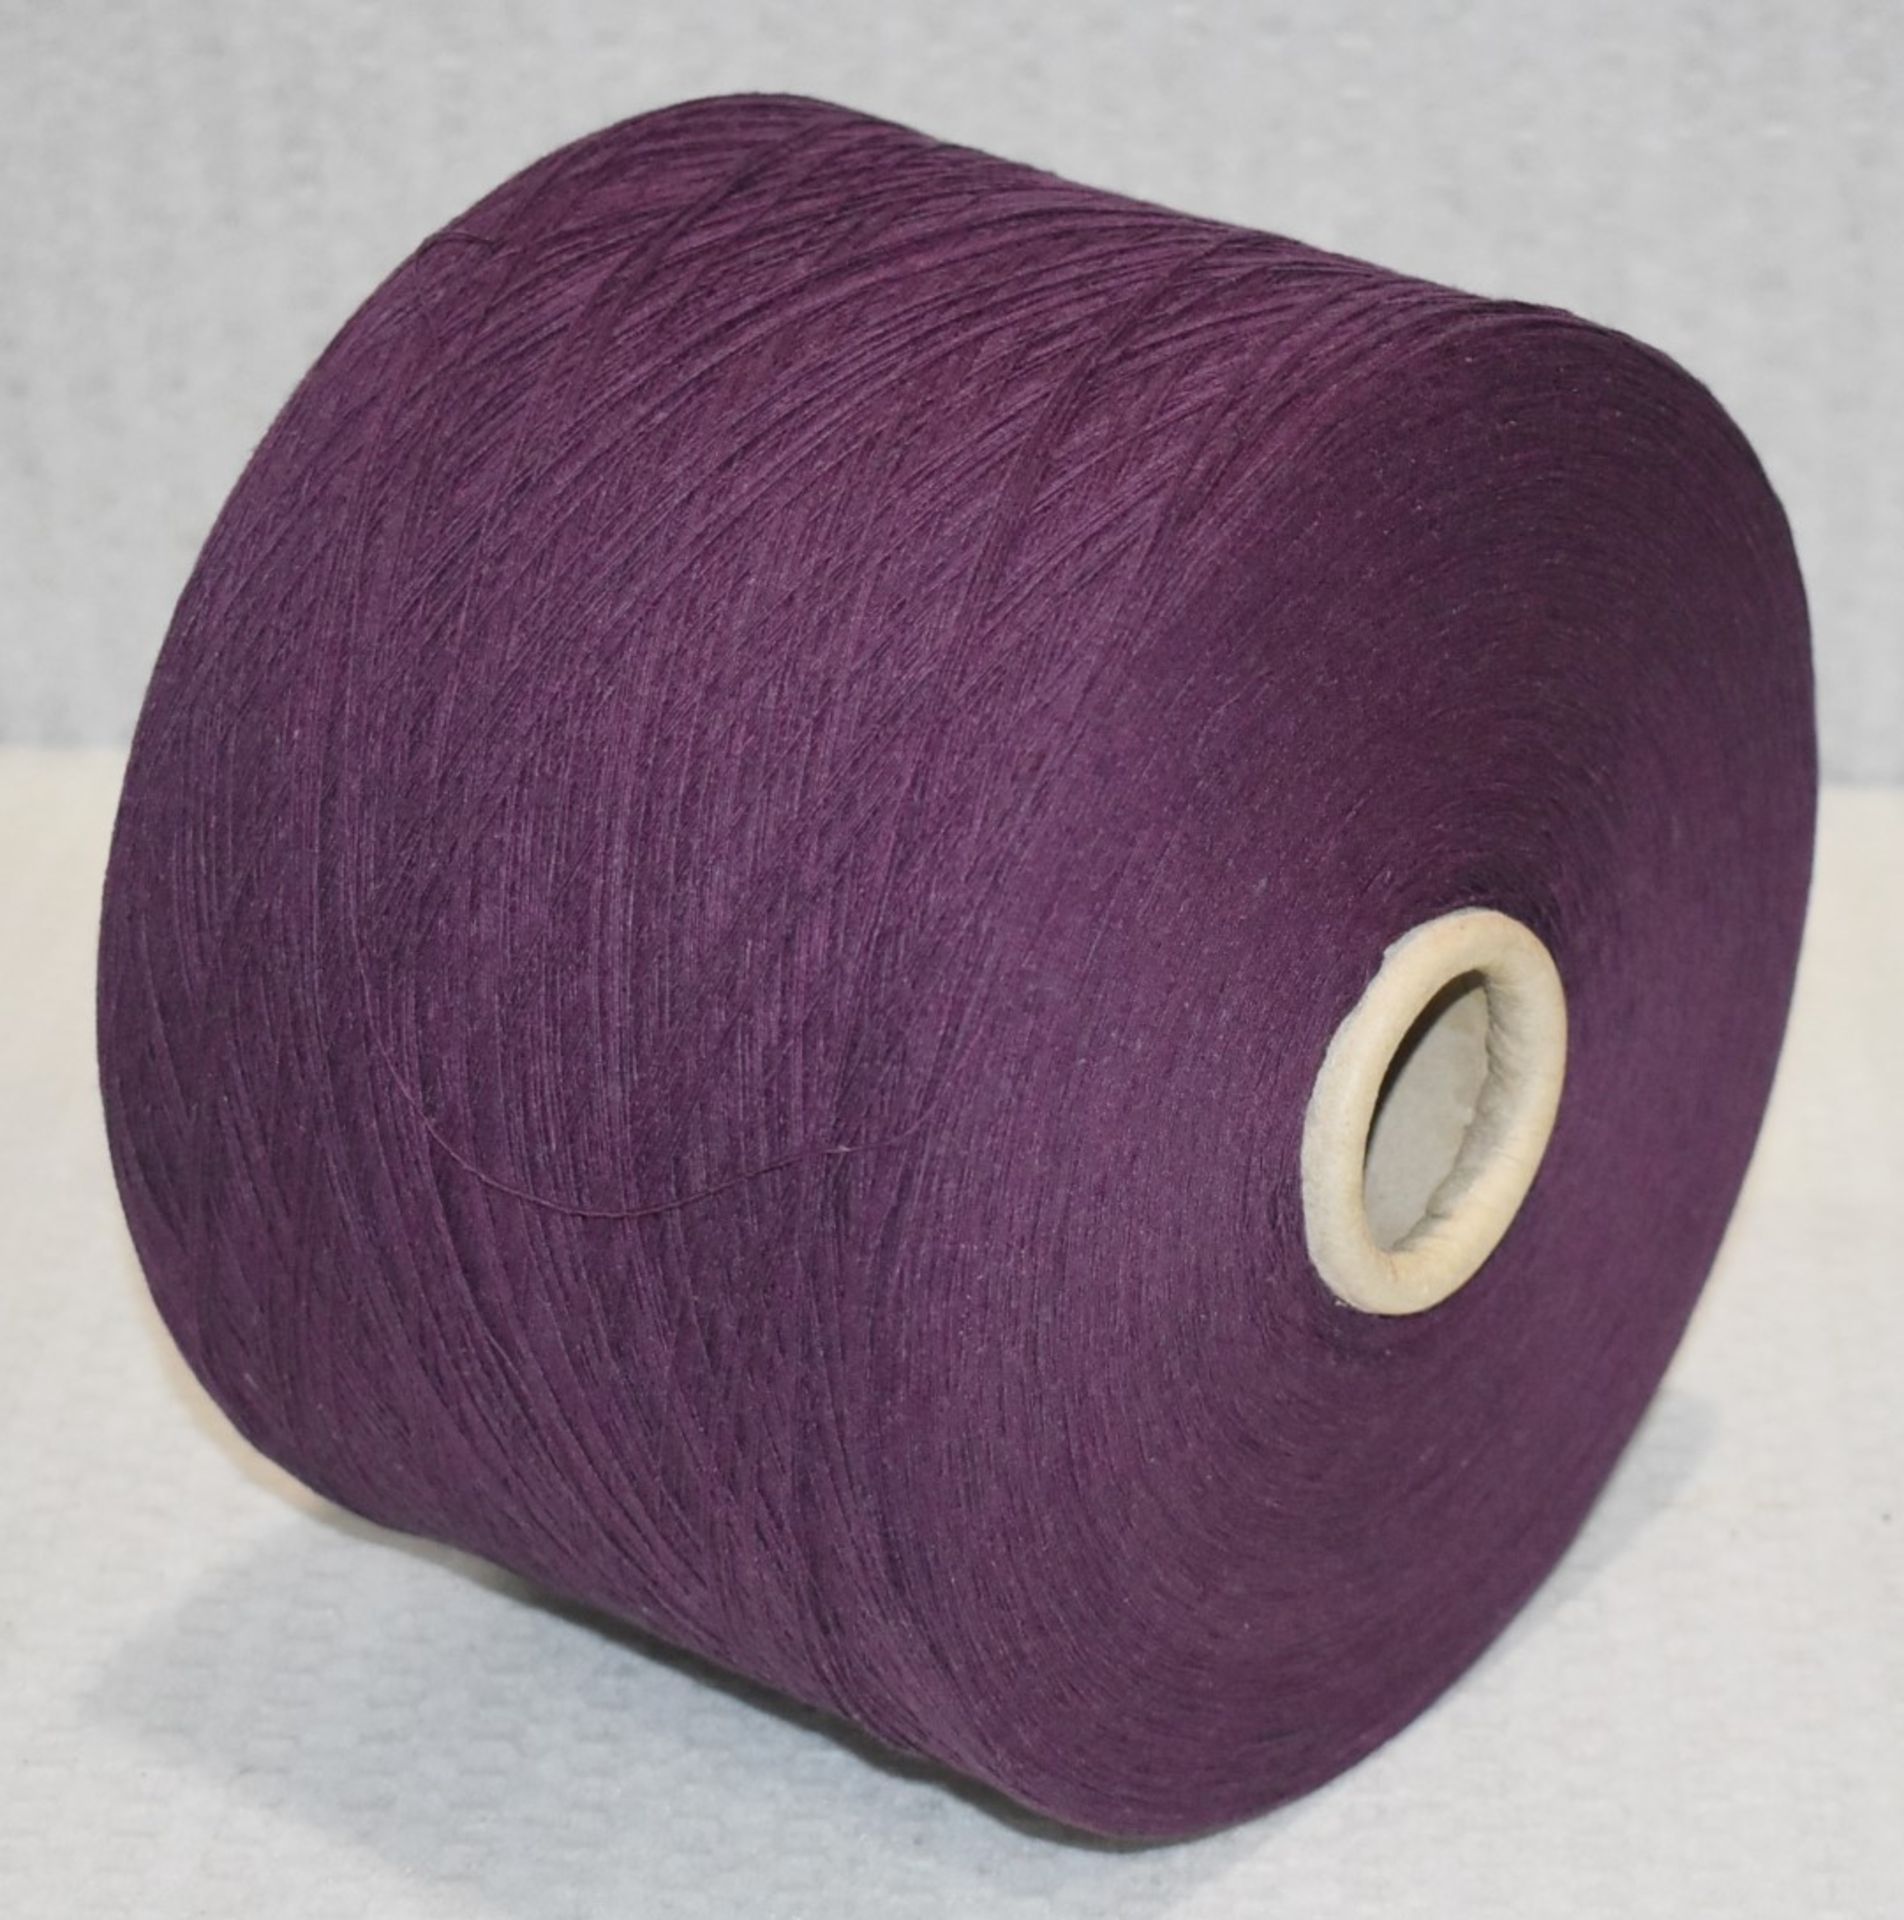 1 x Cone of 1/13 MicroCotton Knitting Yarn - Purple - Approx Weight: 2,300g - New Stock ABL Yarn - Image 5 of 9